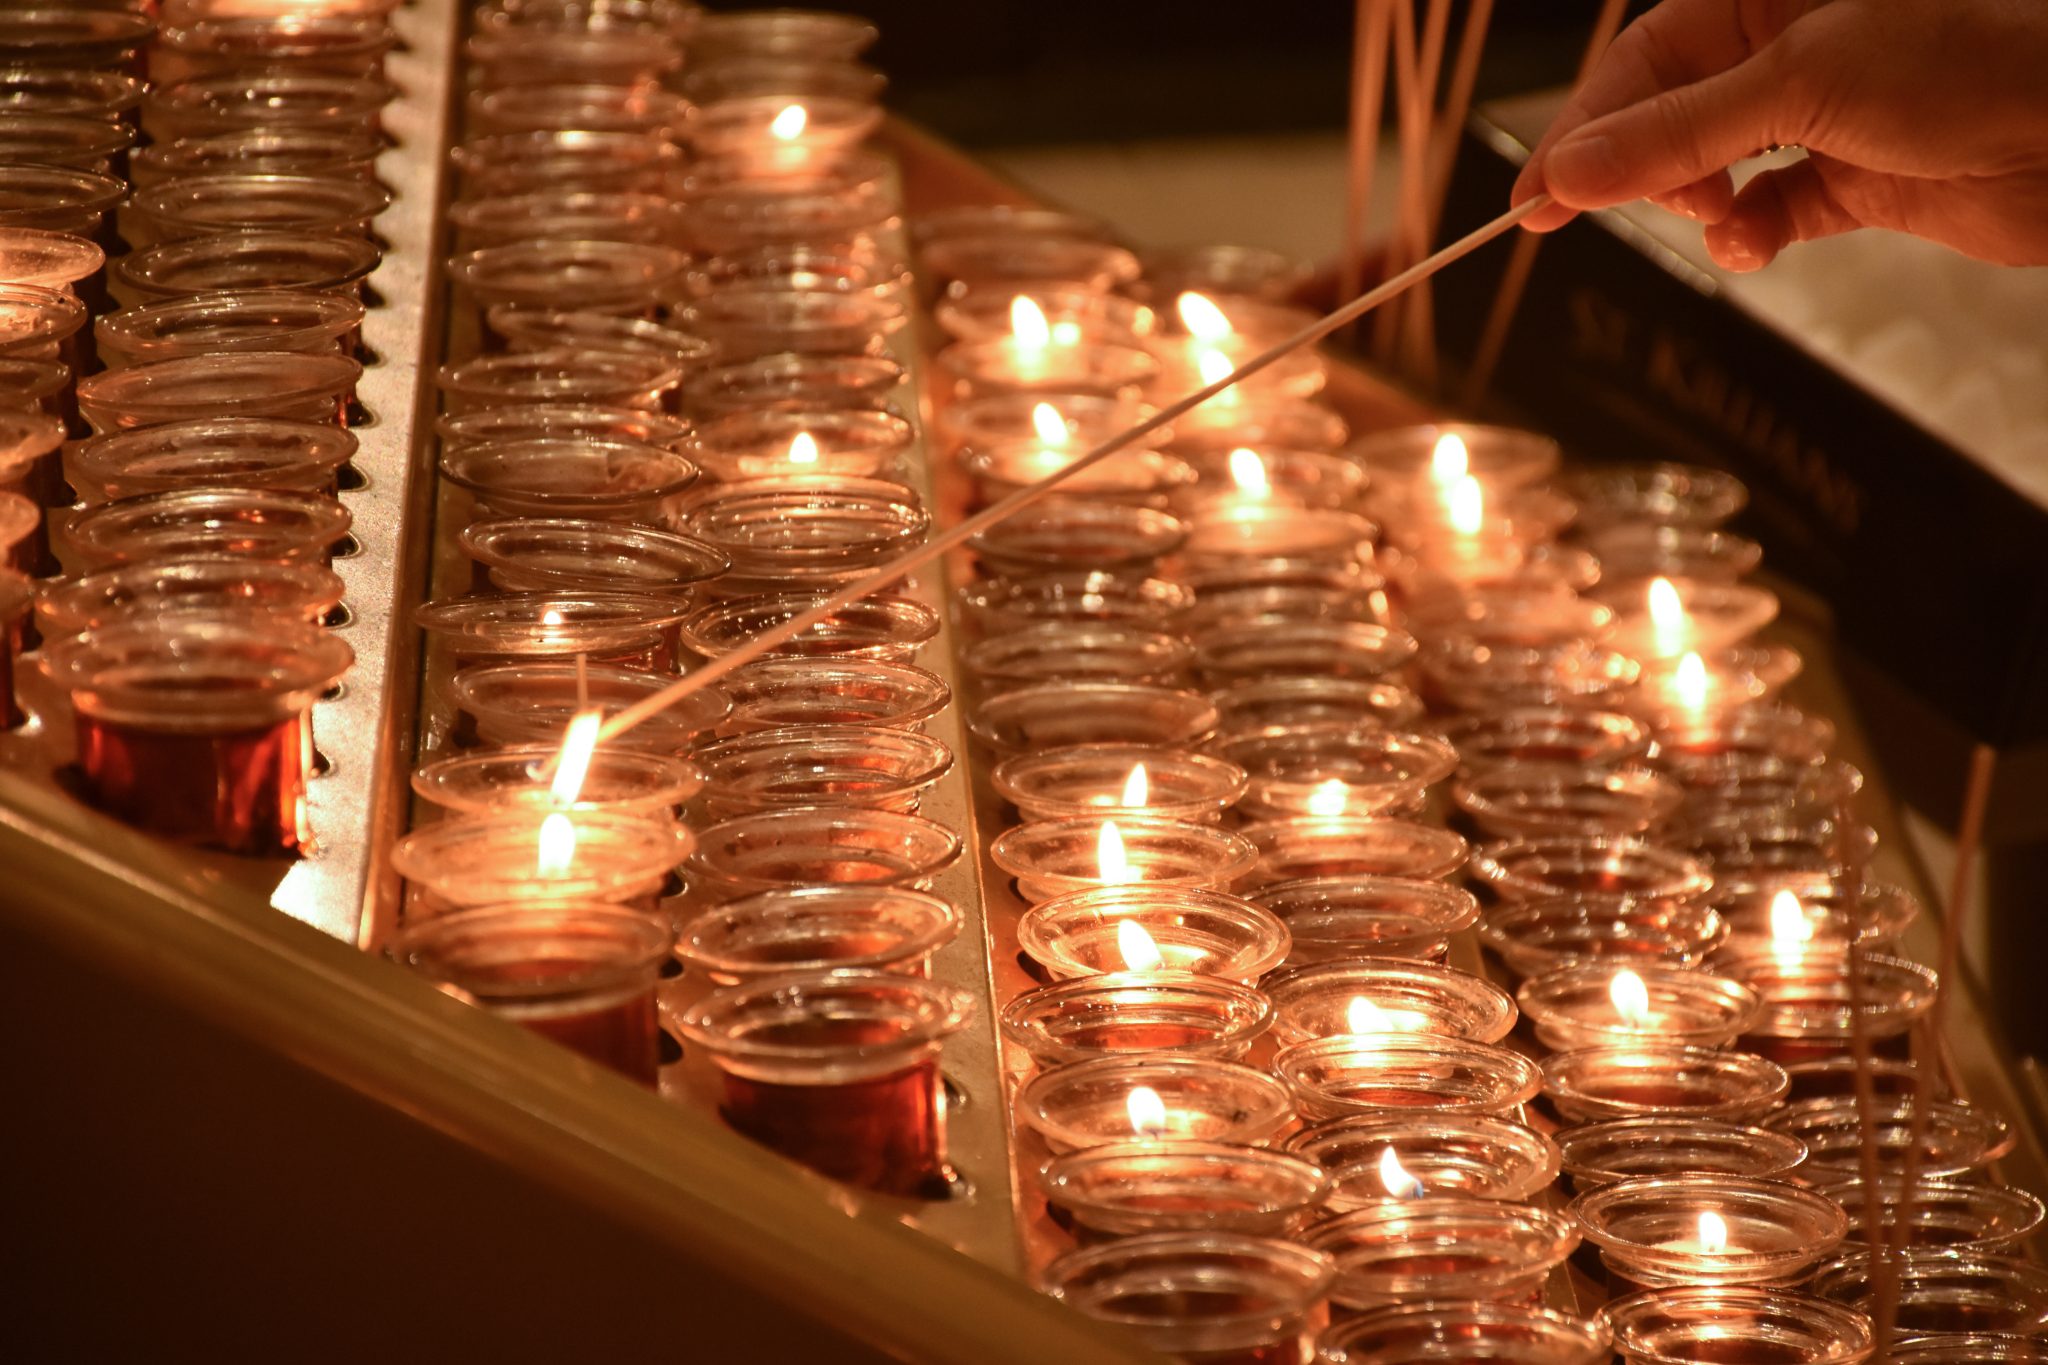 Rows of candles being lit